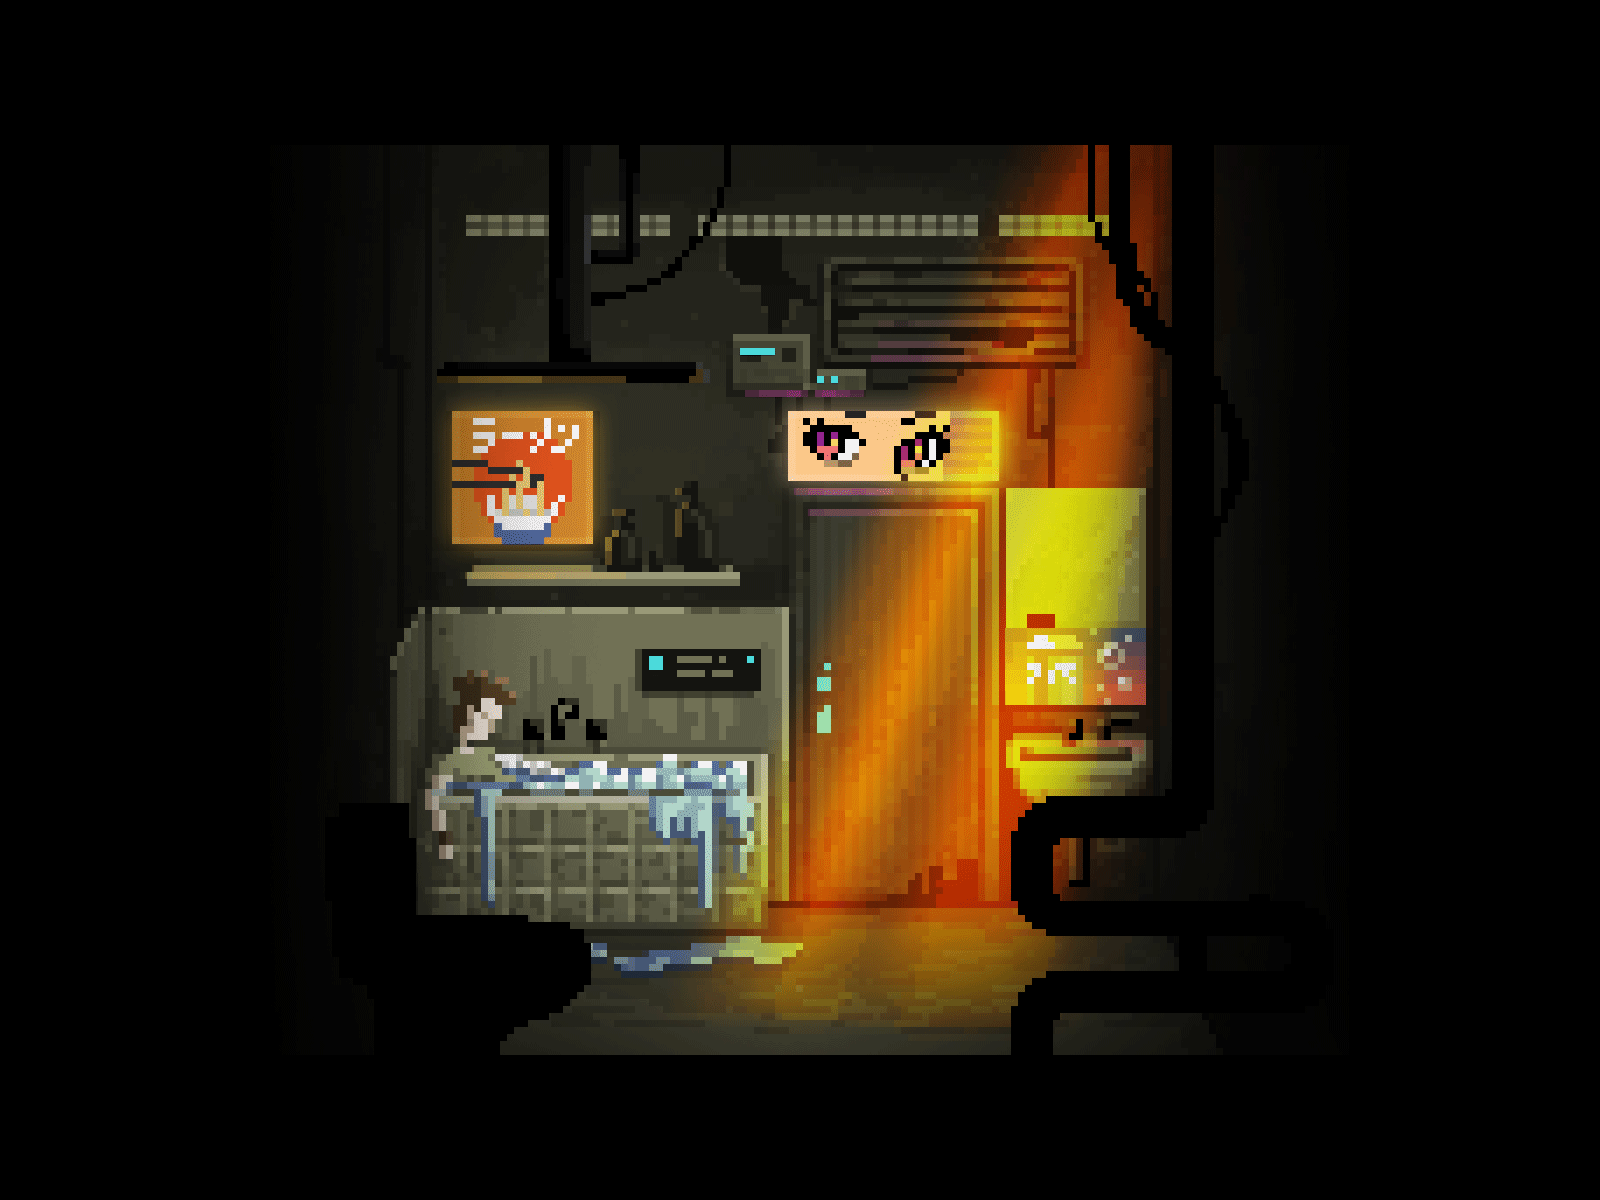 Pixel art room for a cyberpunk indie game by Margarita Solianova on Dribbble